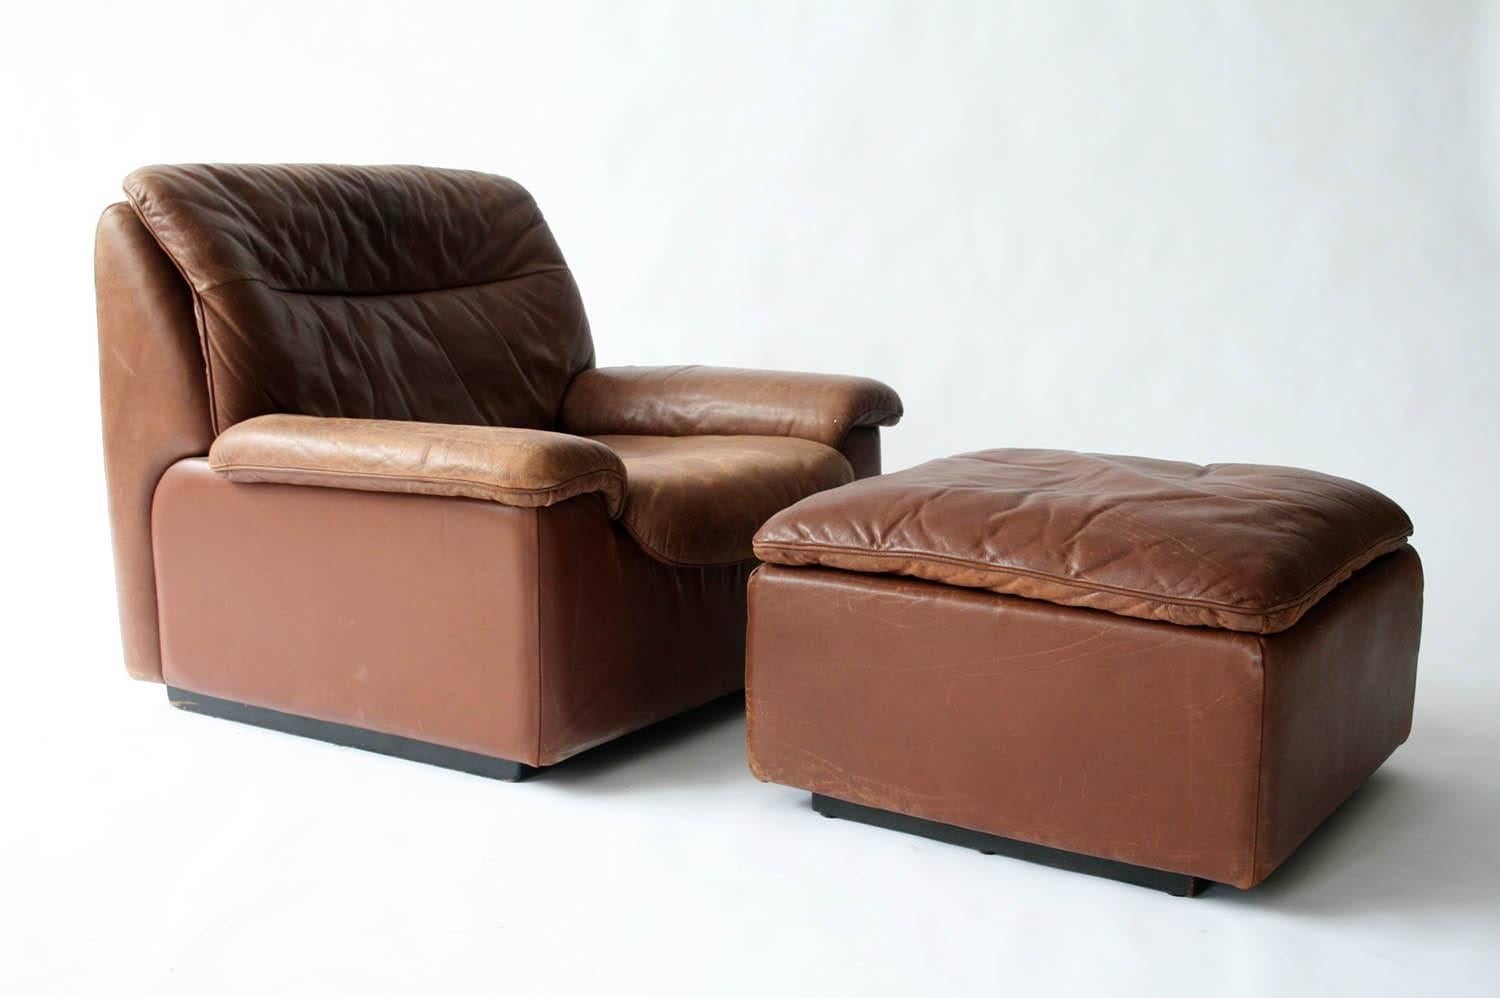 Brown leather De Sede Switzerland lounge chair and ottoman

Measures: H 15